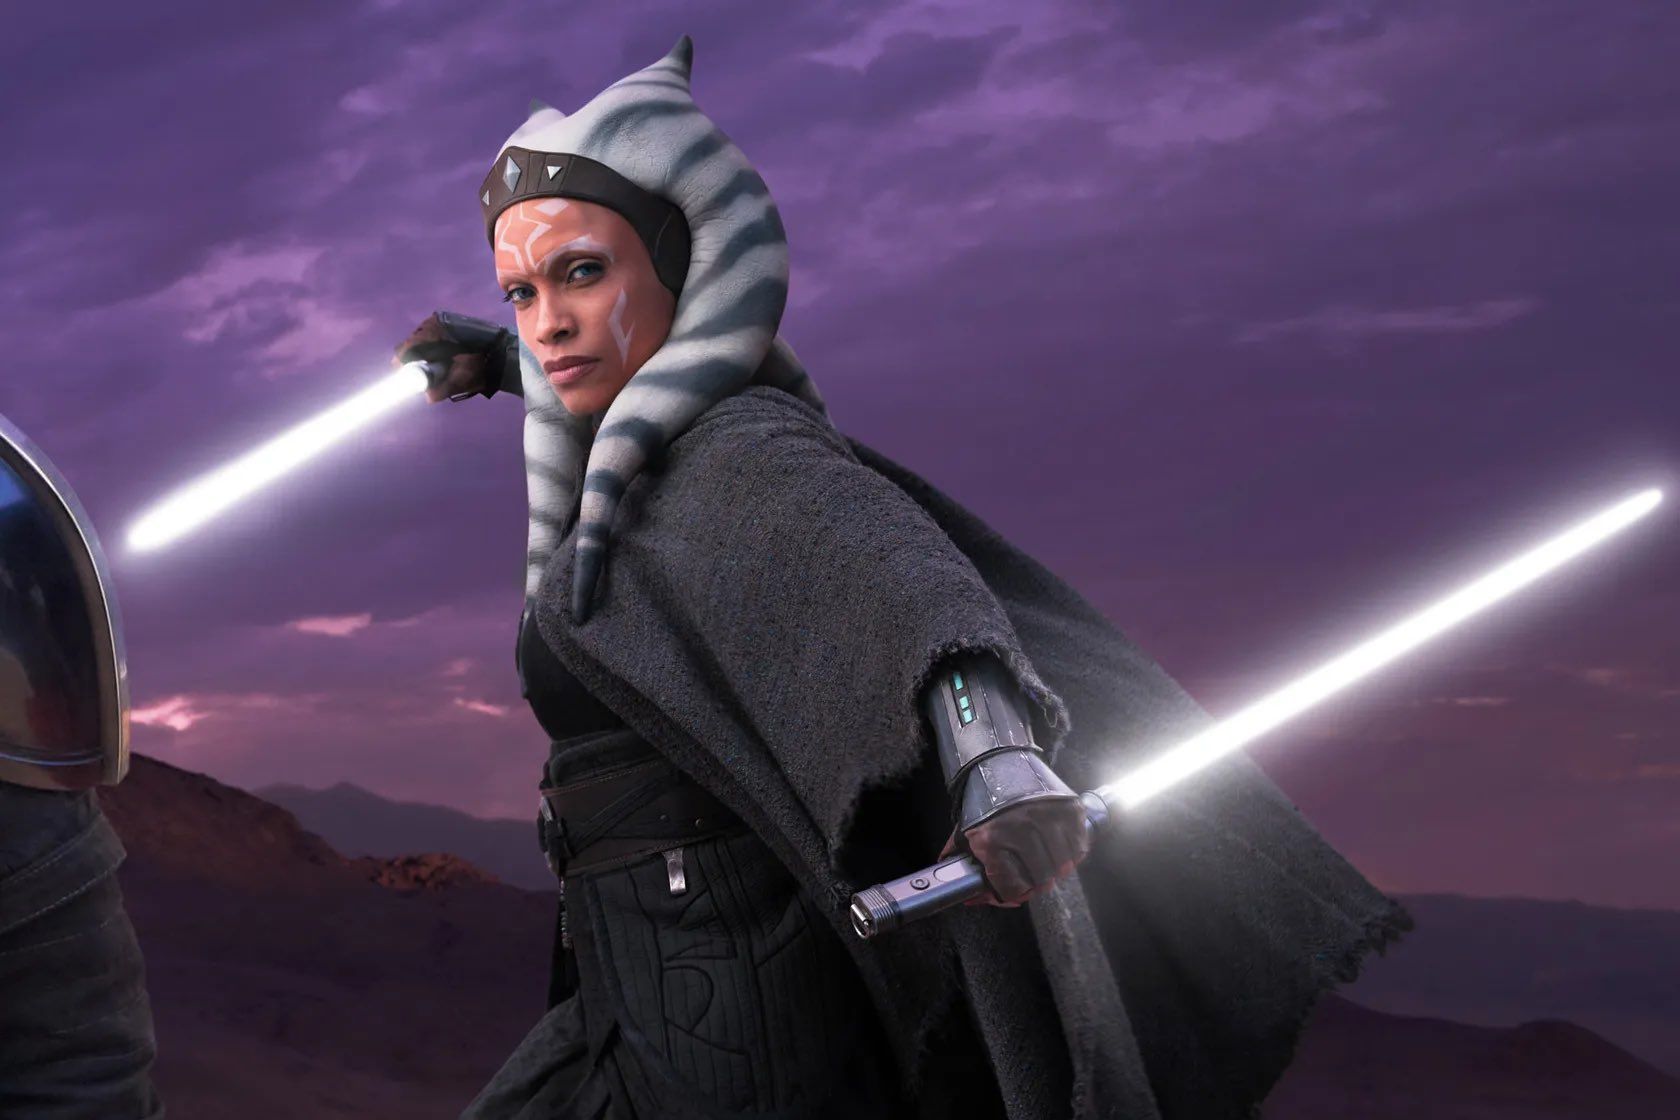 Ahsoka, Star Wars upcoming live-action series: All you need to know